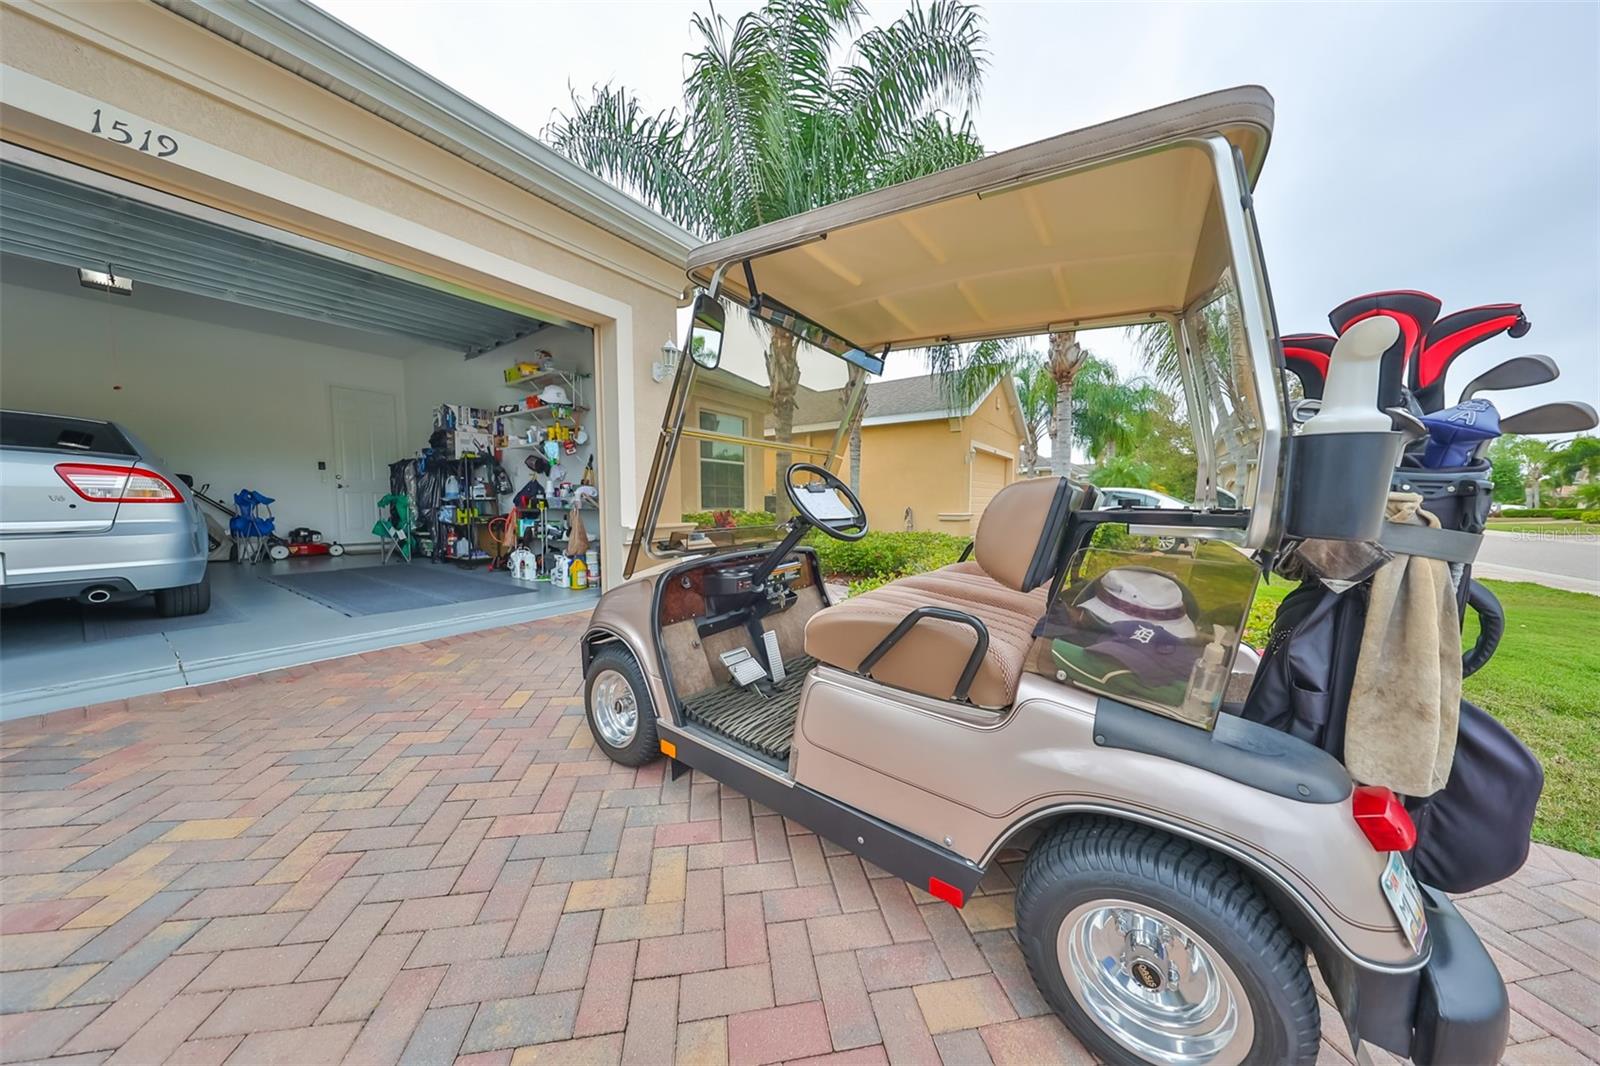 Golf Cart CONVEYS WITH THE SALE OF THE HOME.